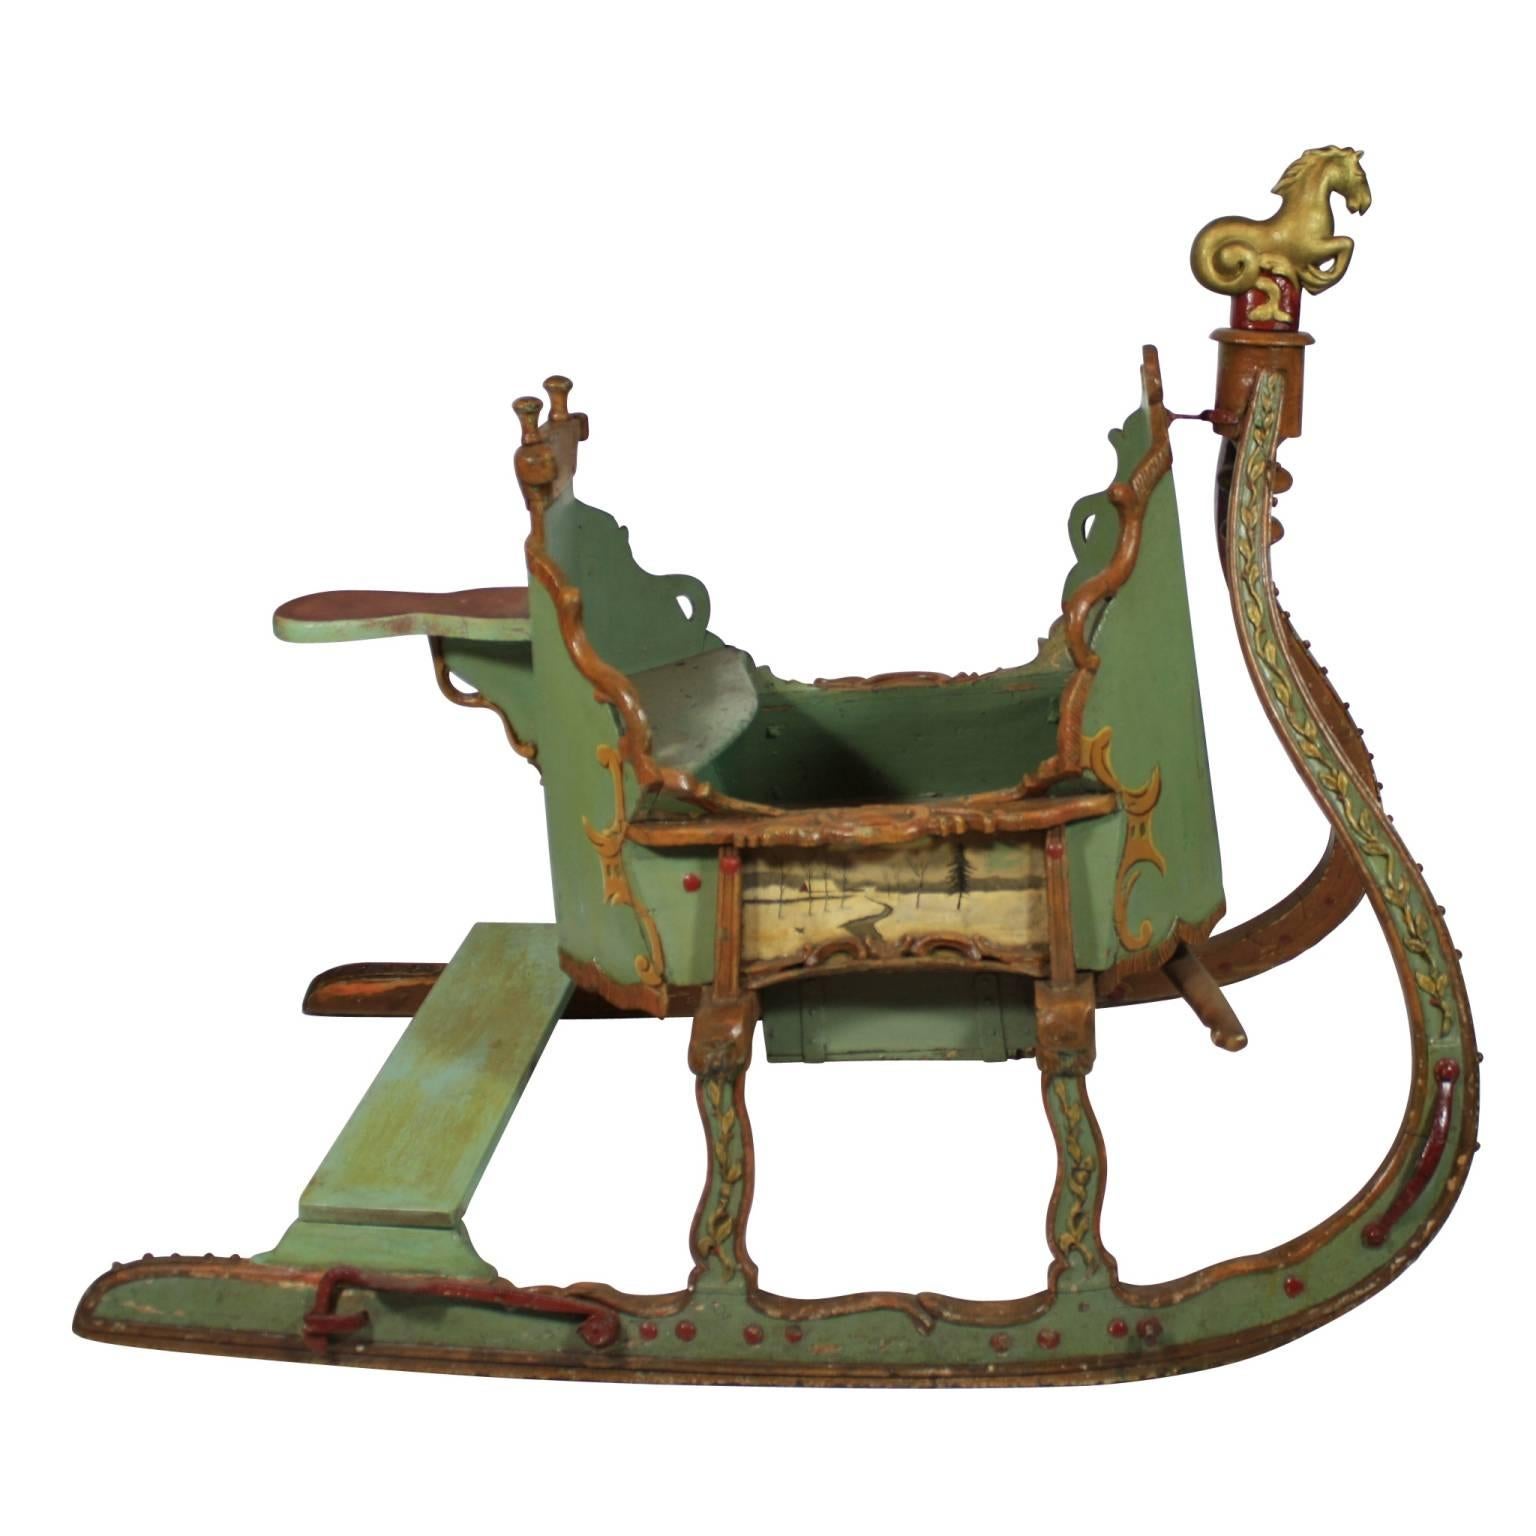 Repainted at the turn of the 20th century, this Russian sleigh still maintains its original style and charm. We love the traditionally bleak Folk Art winter scenes on each side of the sleigh, showcasing the harshness of Russian winters. With a